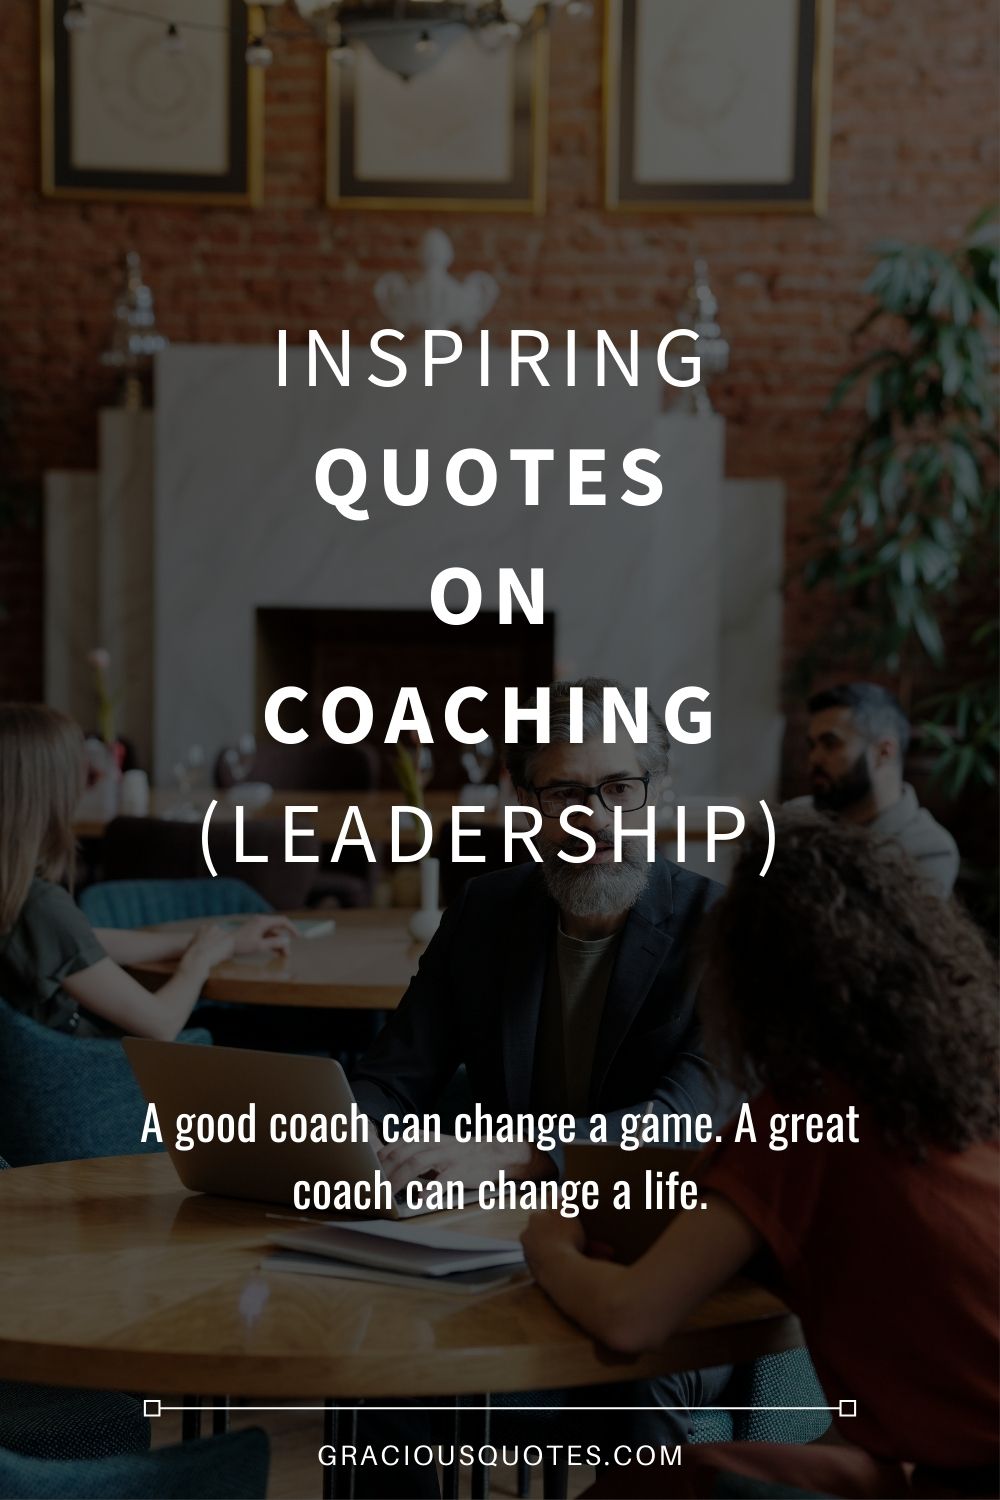 Inspiring Quotes on Coaching (LEADERSHIP) - Gracious Quotes